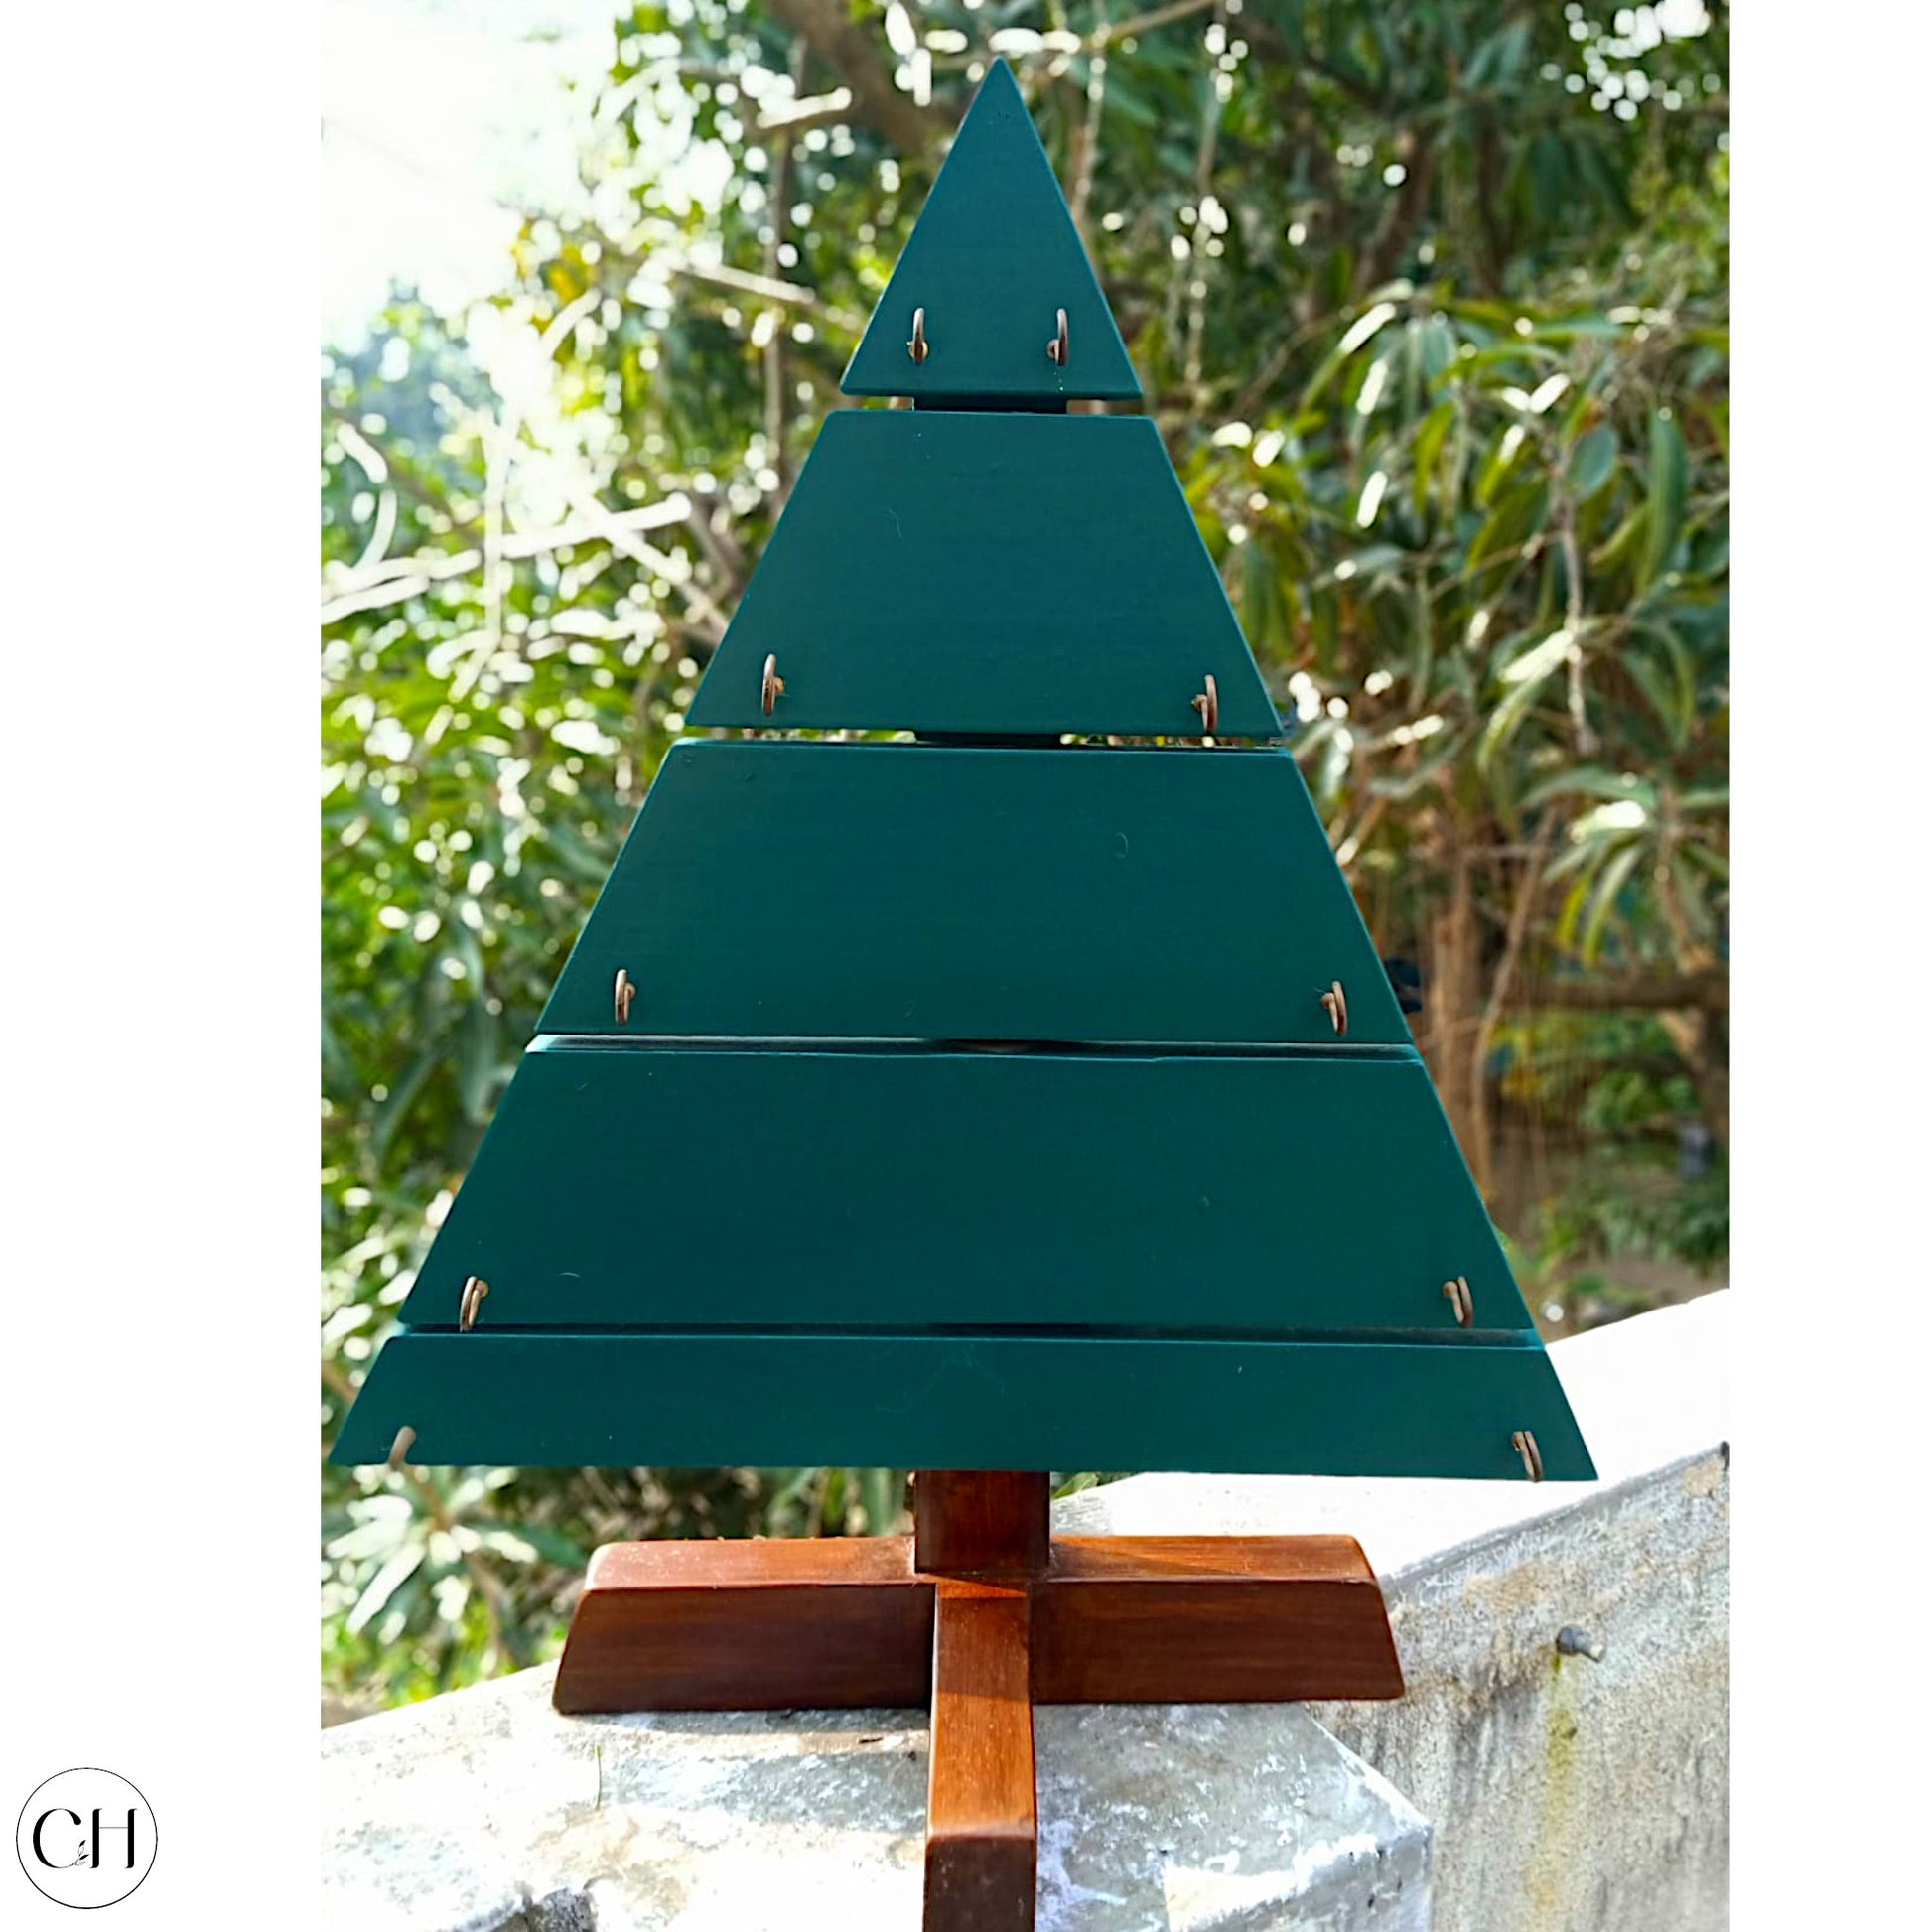 CustHum Noel-small wooden christmas tree with hooks to hang ornaments, placed against a background of greenery